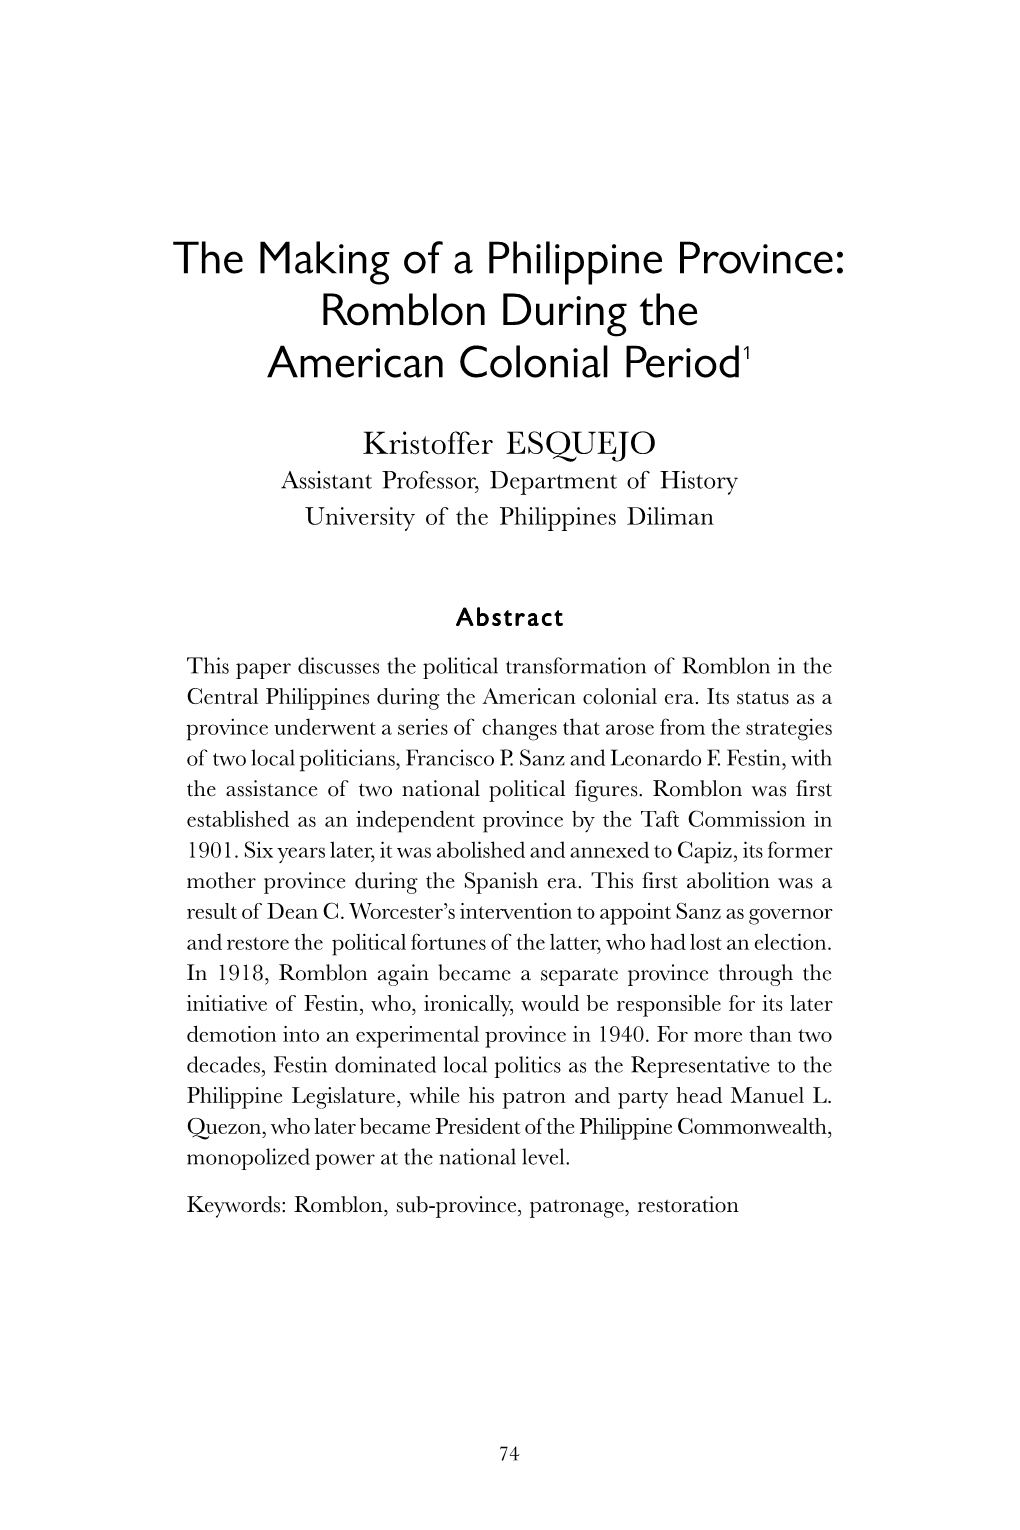 The Making of a Philippine Province: Romblon During the American Colonial Period1